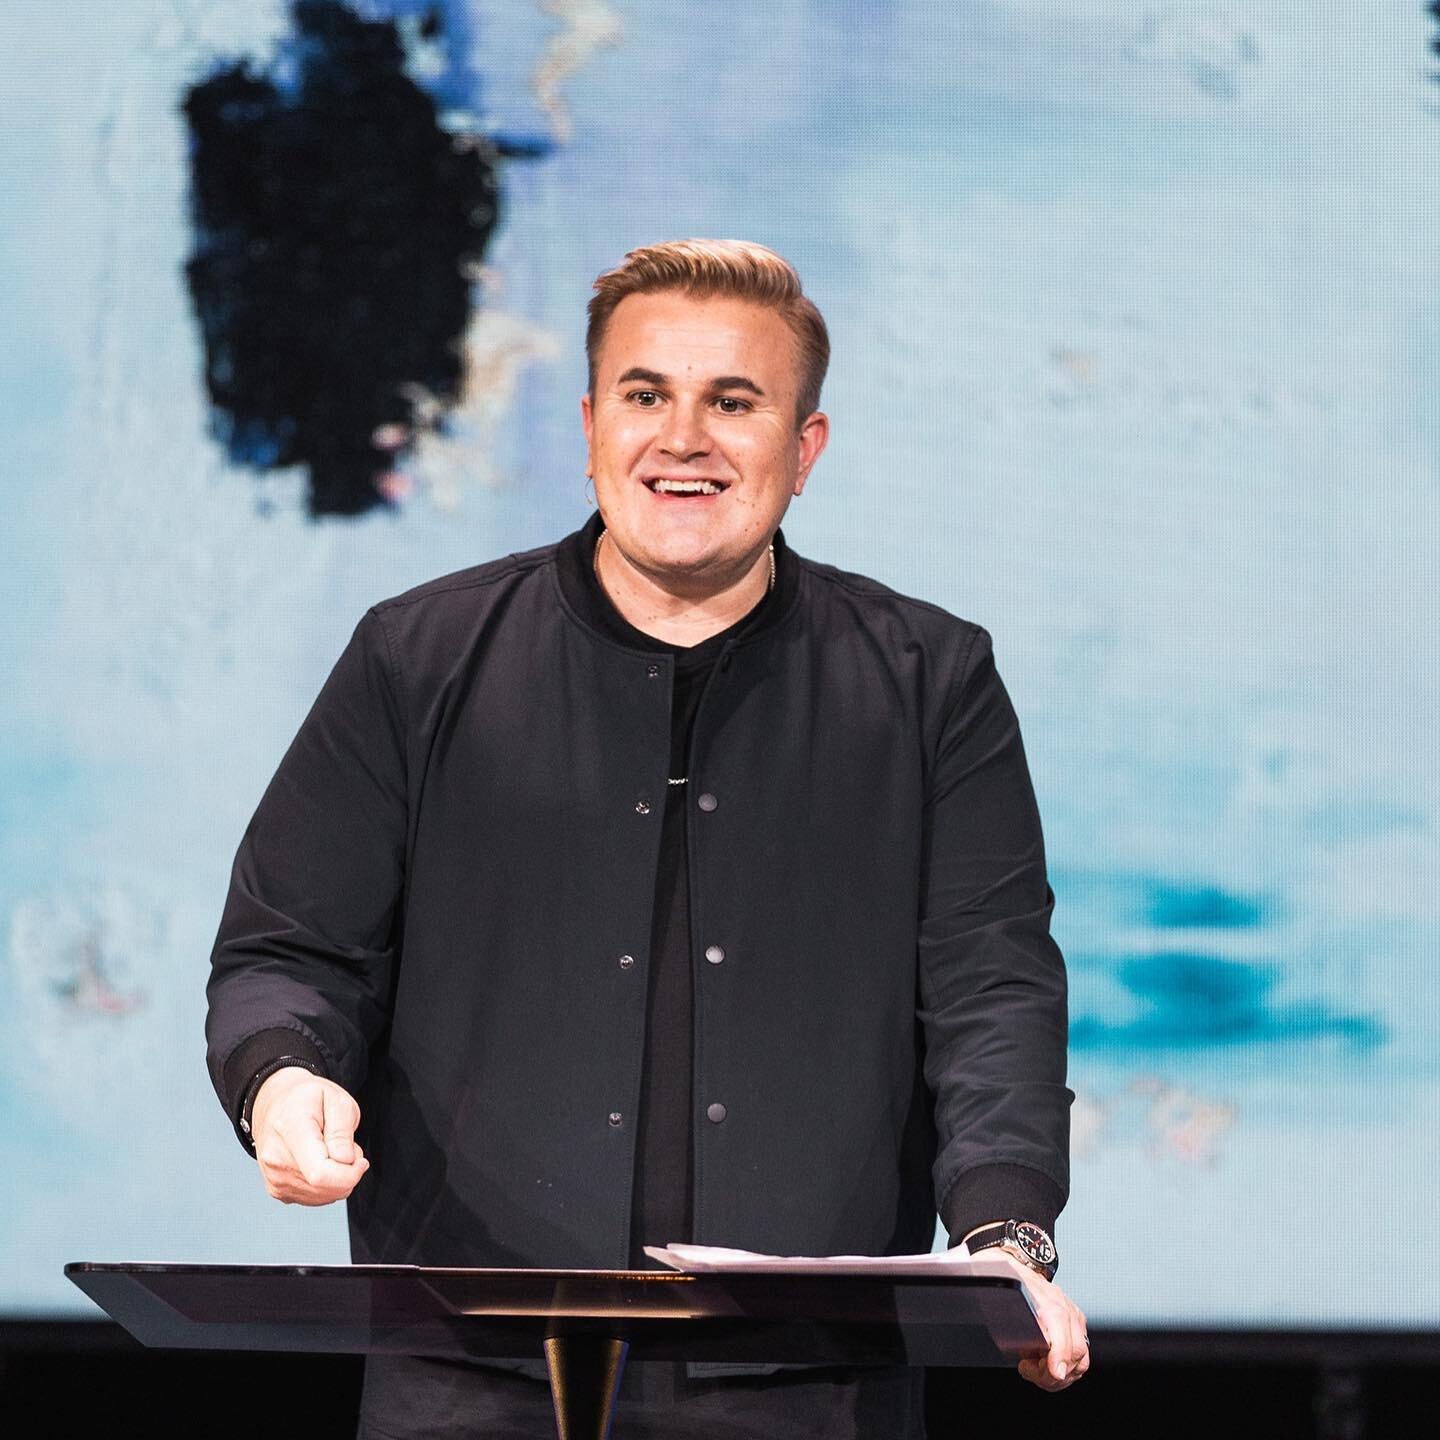 Happy Birthday to our Pastor @kentmunsey!!! 🥳🎉
Thank you for being YOU!  A genuine example of authenticity, love and obedience to God. We love you!!